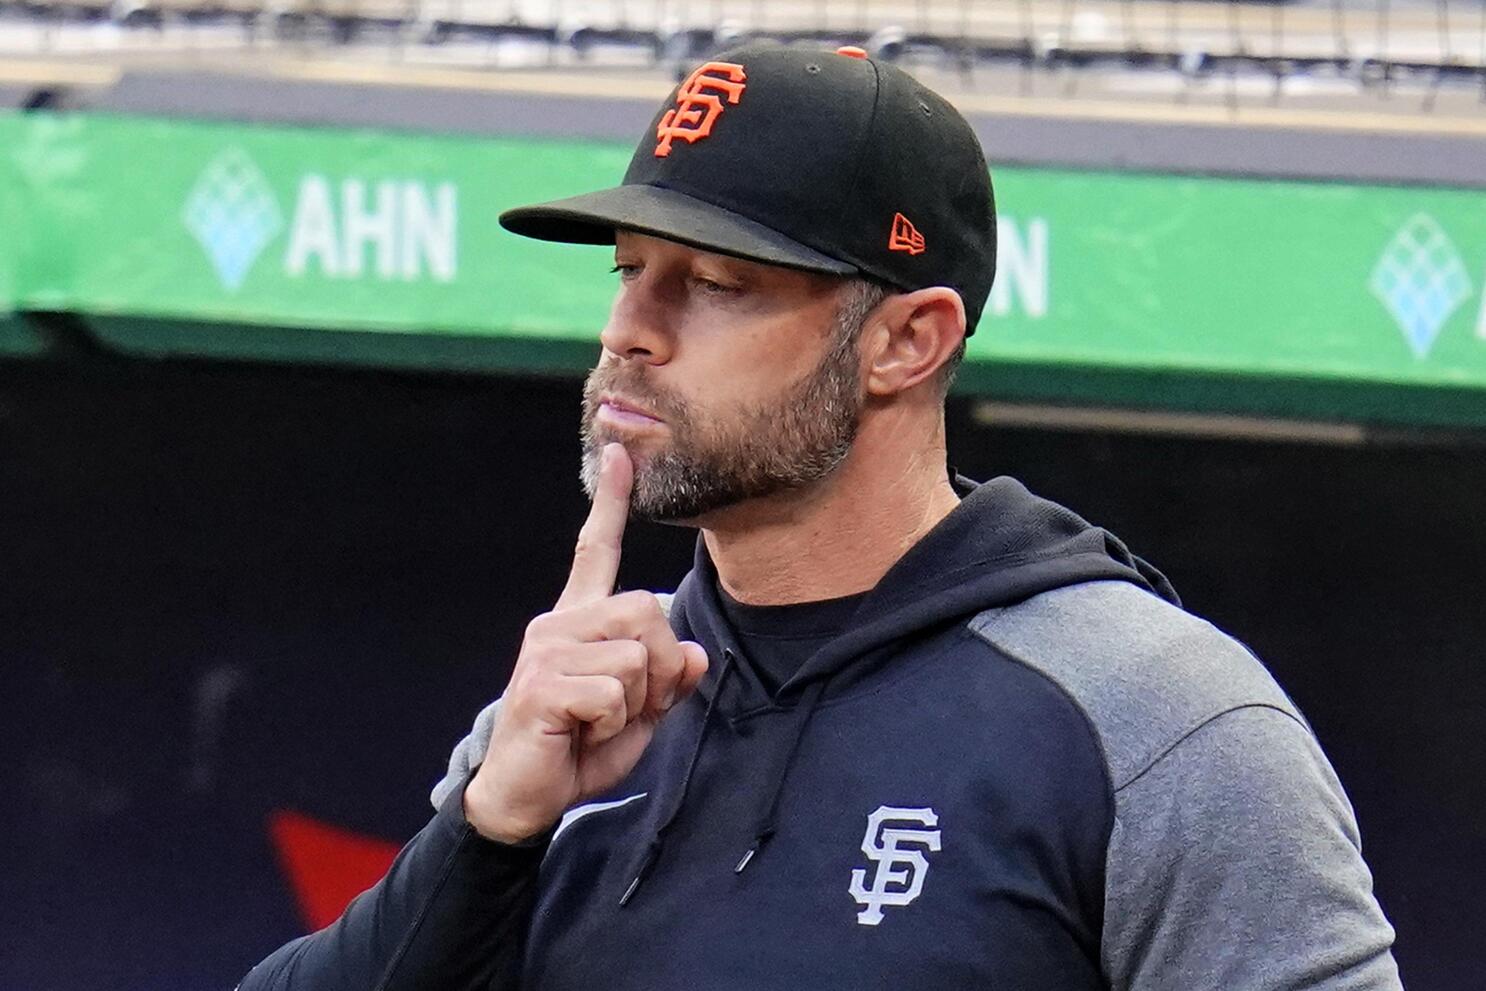 Giants to honor Pride Month with logo on caps and uniforms